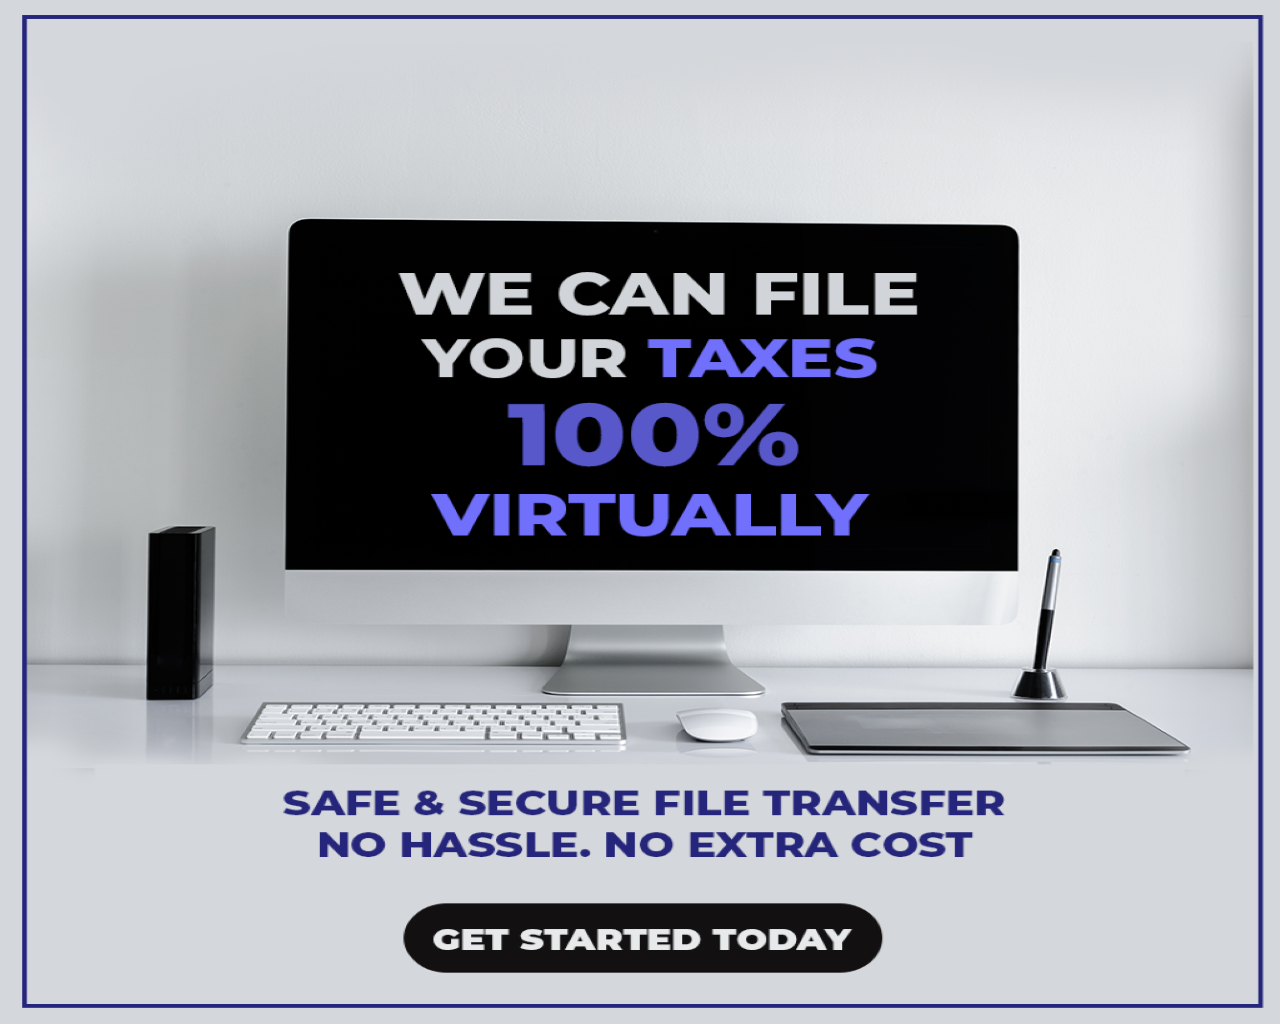 We can file your taxes one hundred percent virtually